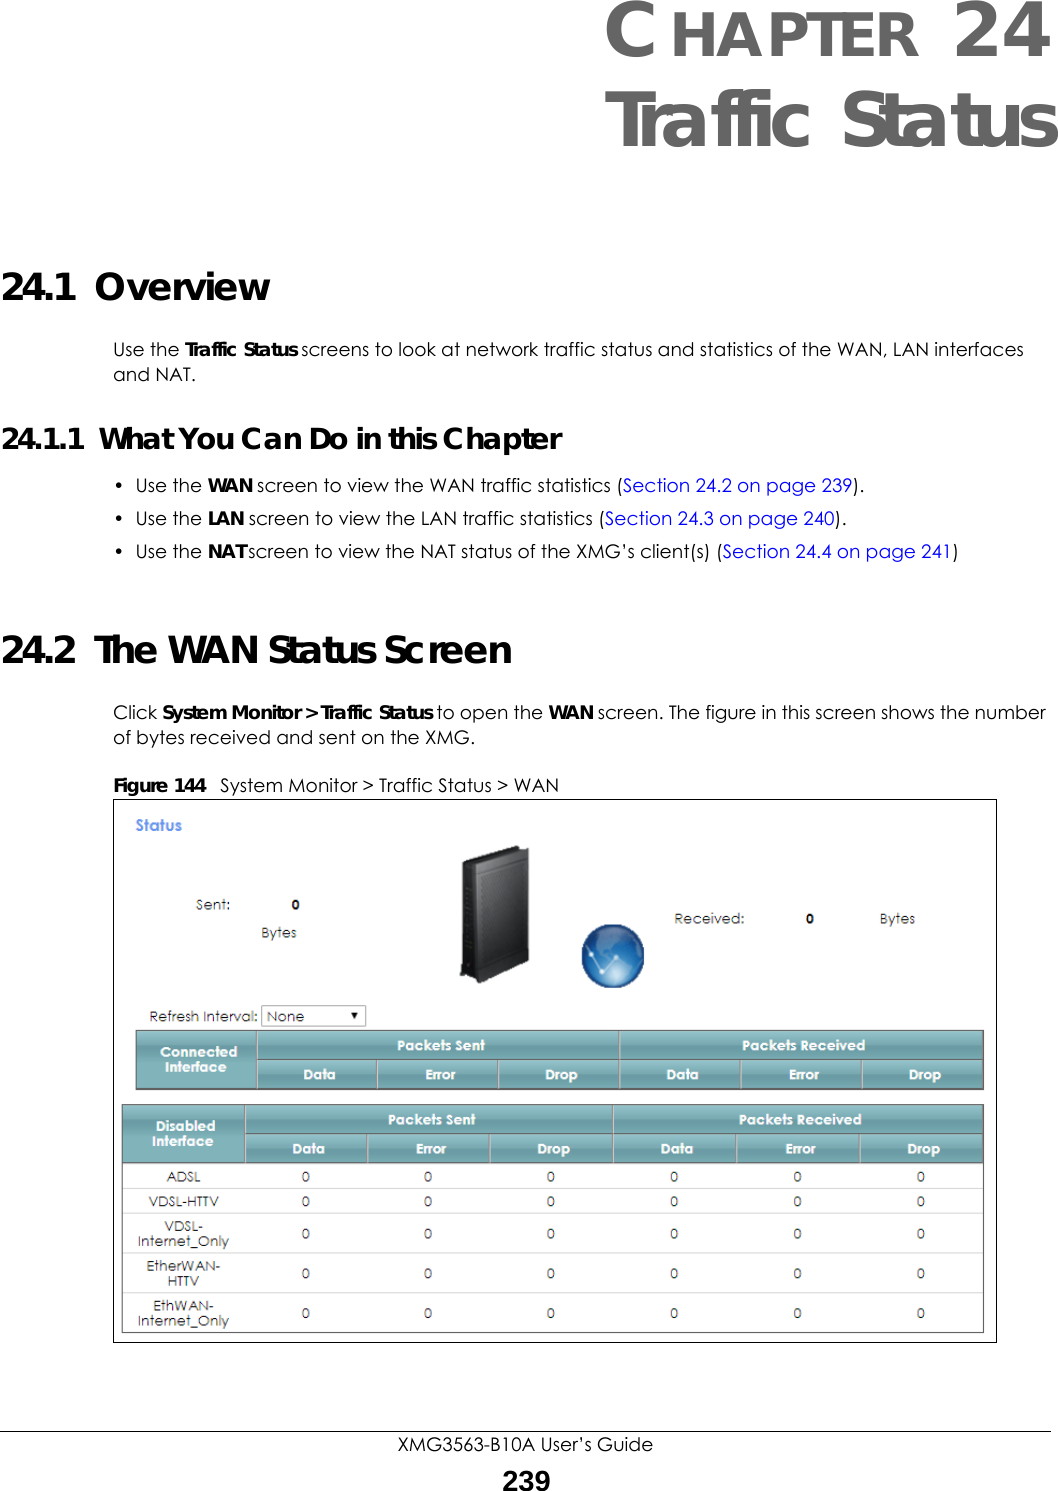 XMG3563-B10A User’s Guide239CHAPTER 24Traffic Status24.1  OverviewUse the Traffic Status screens to look at network traffic status and statistics of the WAN, LAN interfaces and NAT. 24.1.1  What You Can Do in this Chapter• Use the WAN screen to view the WAN traffic statistics (Section 24.2 on page 239).• Use the LAN screen to view the LAN traffic statistics (Section 24.3 on page 240).• Use the NAT screen to view the NAT status of the XMG’s client(s) (Section 24.4 on page 241)24.2  The WAN Status Screen Click System Monitor &gt; Traffic Status to open the WAN screen. The figure in this screen shows the number of bytes received and sent on the XMG.Figure 144   System Monitor &gt; Traffic Status &gt; WAN